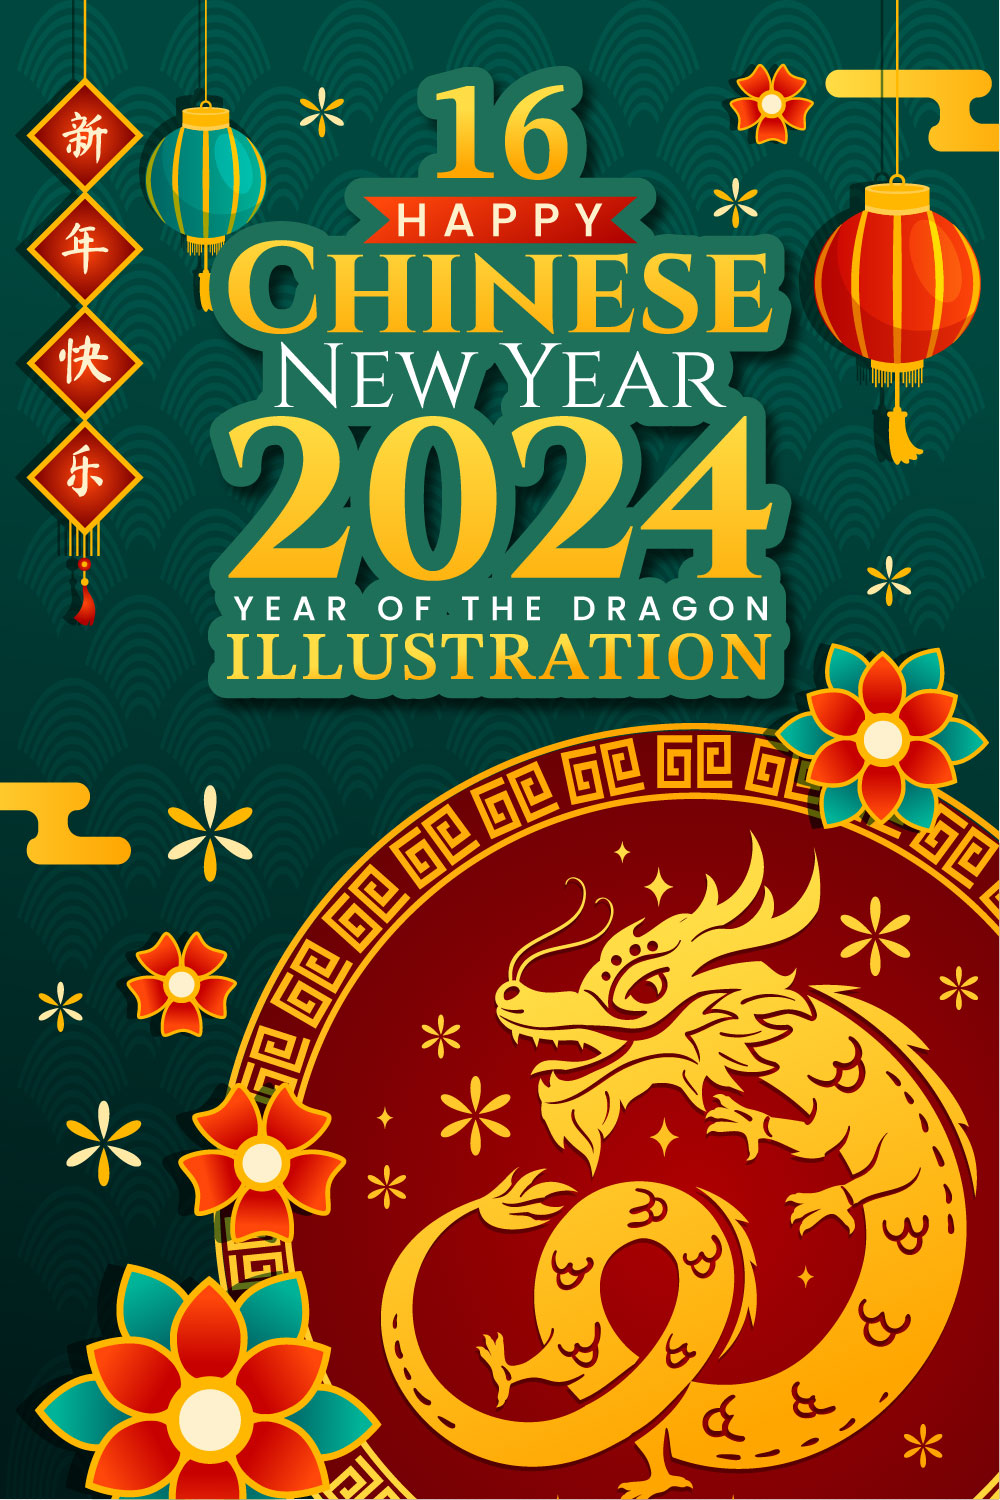 16 Happy Chinese New Year 2024 Illustration pinterest preview image.